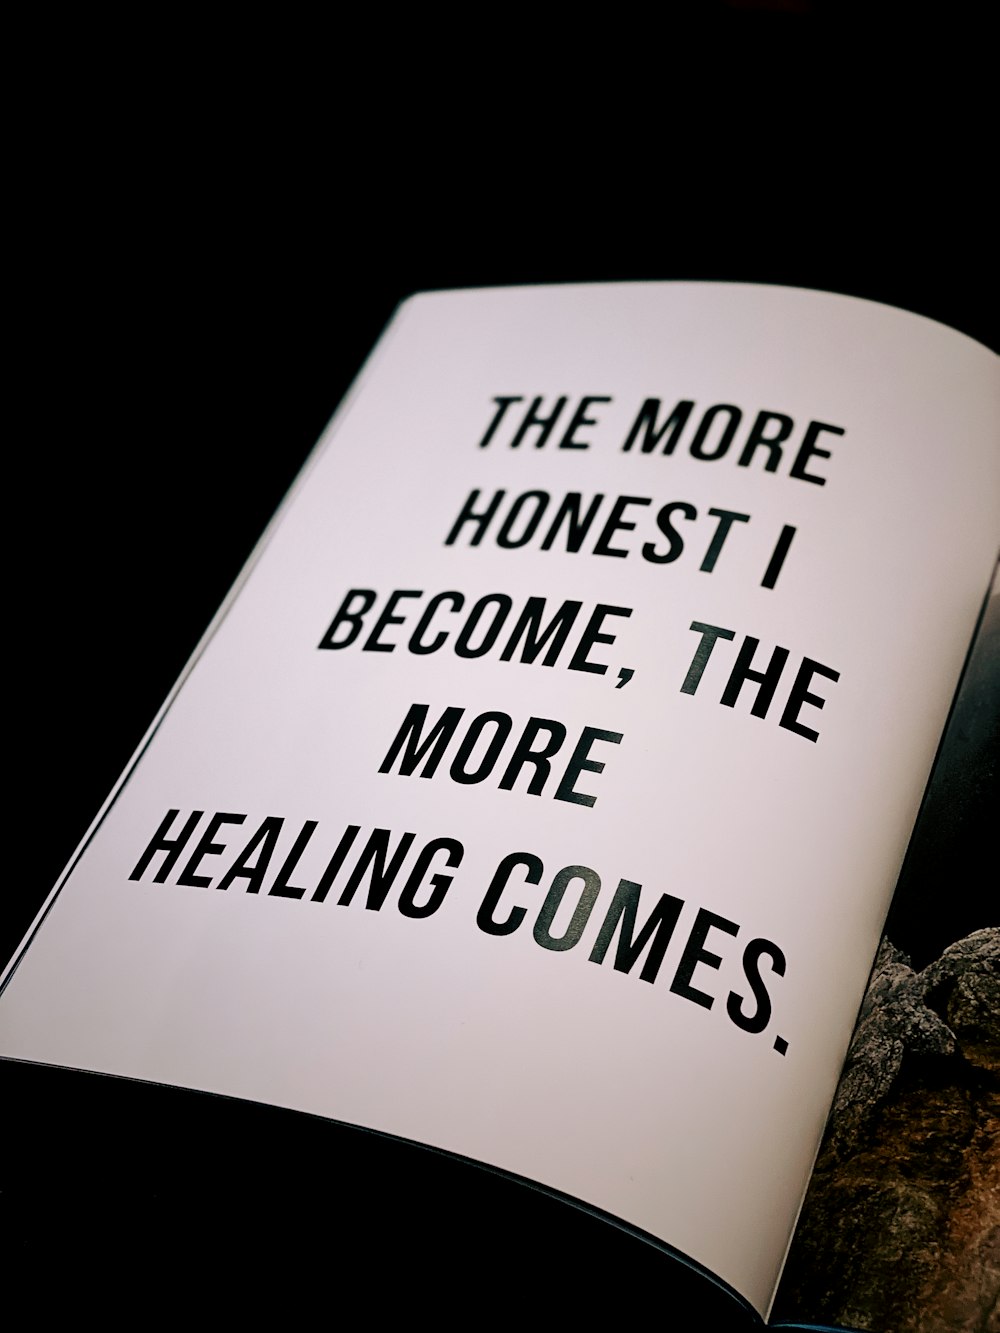 The More Honest I Become, The More Healing Comes. text